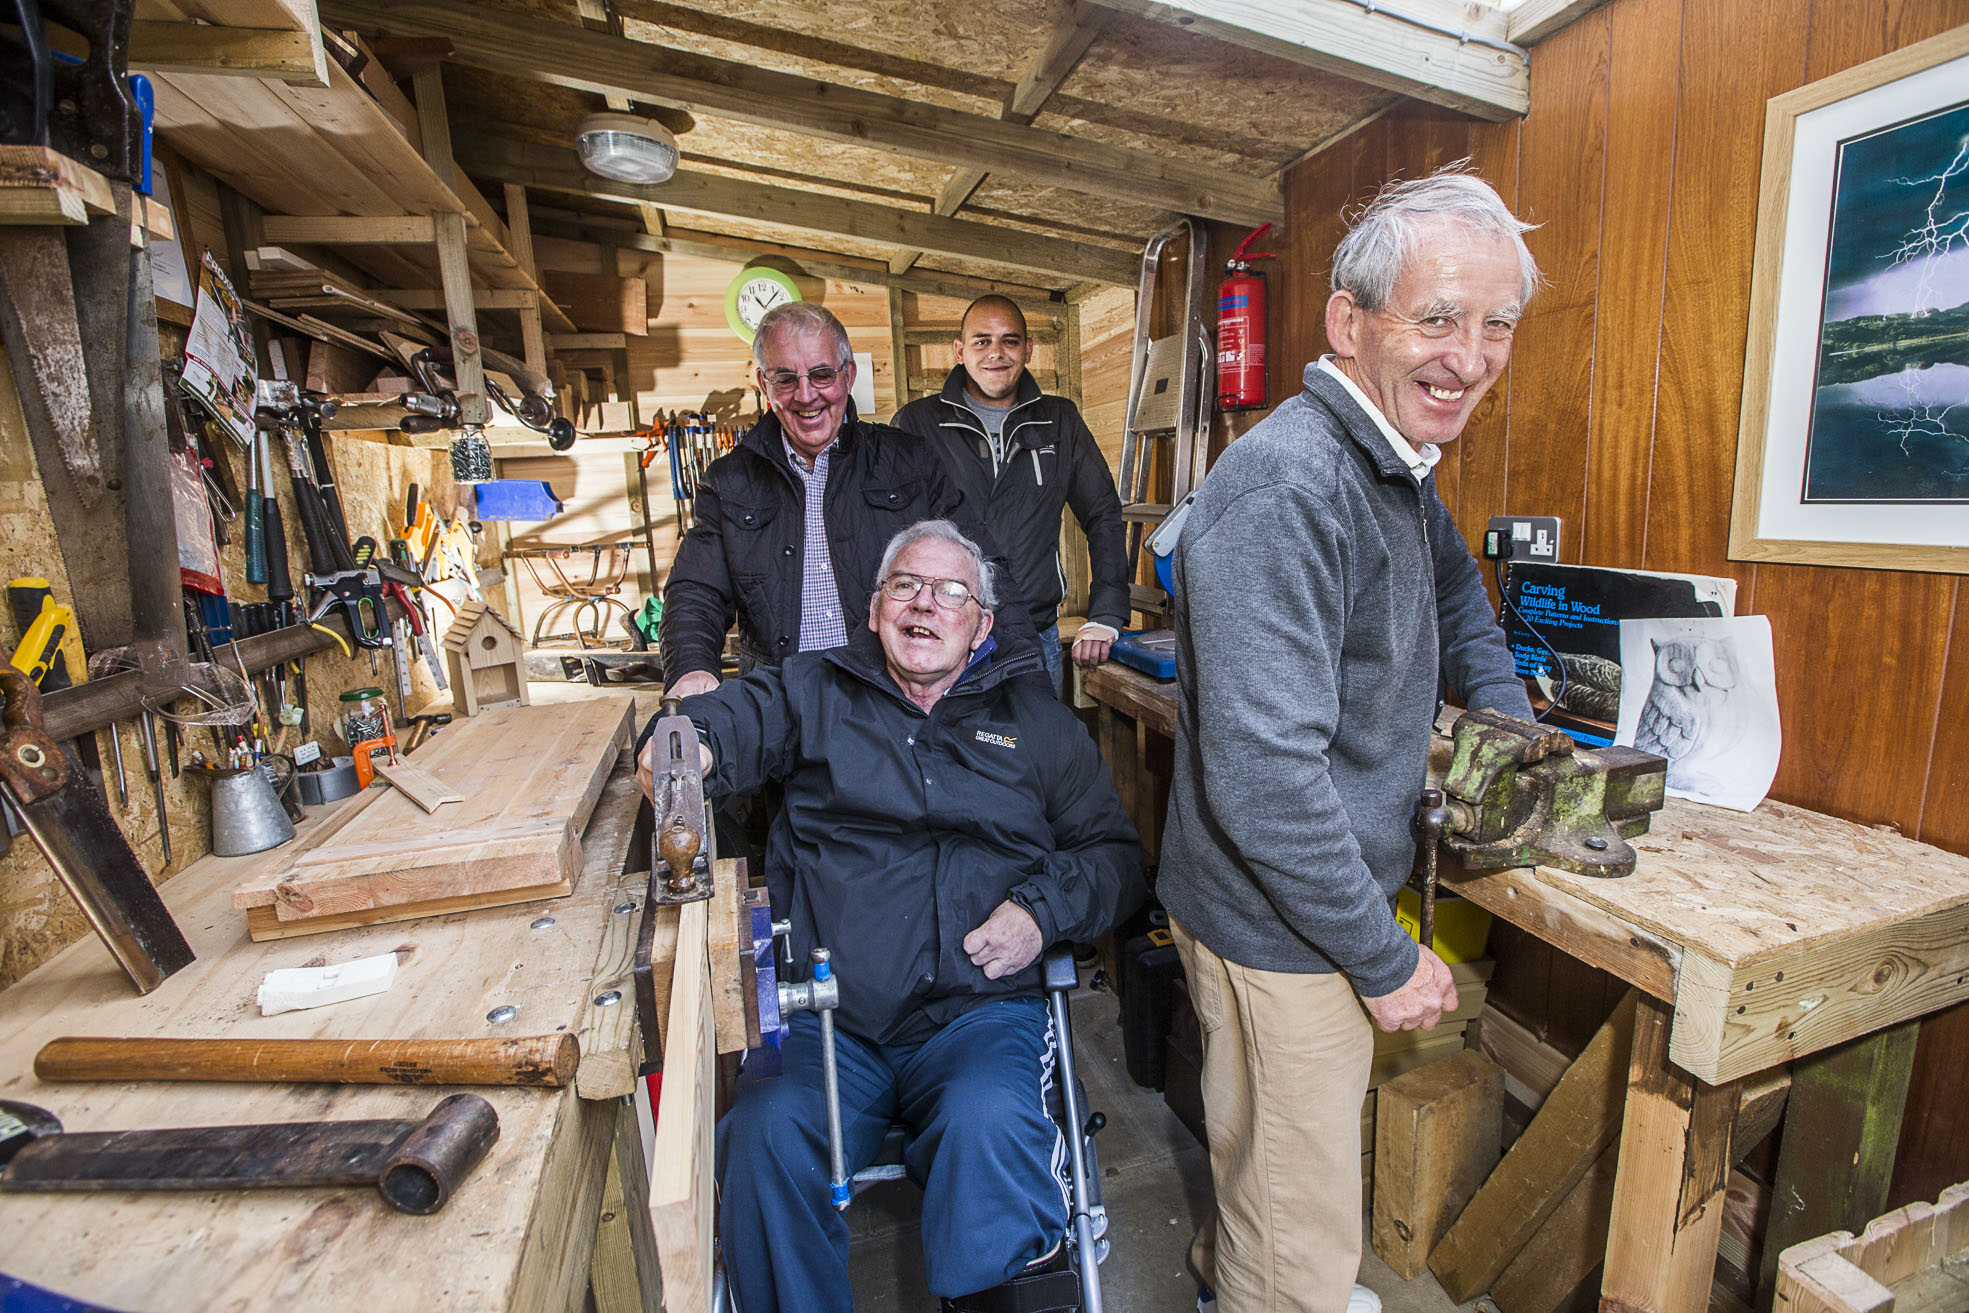 New Llanrwst Men’s shed helps gives stroke patient Bryan new lease of life